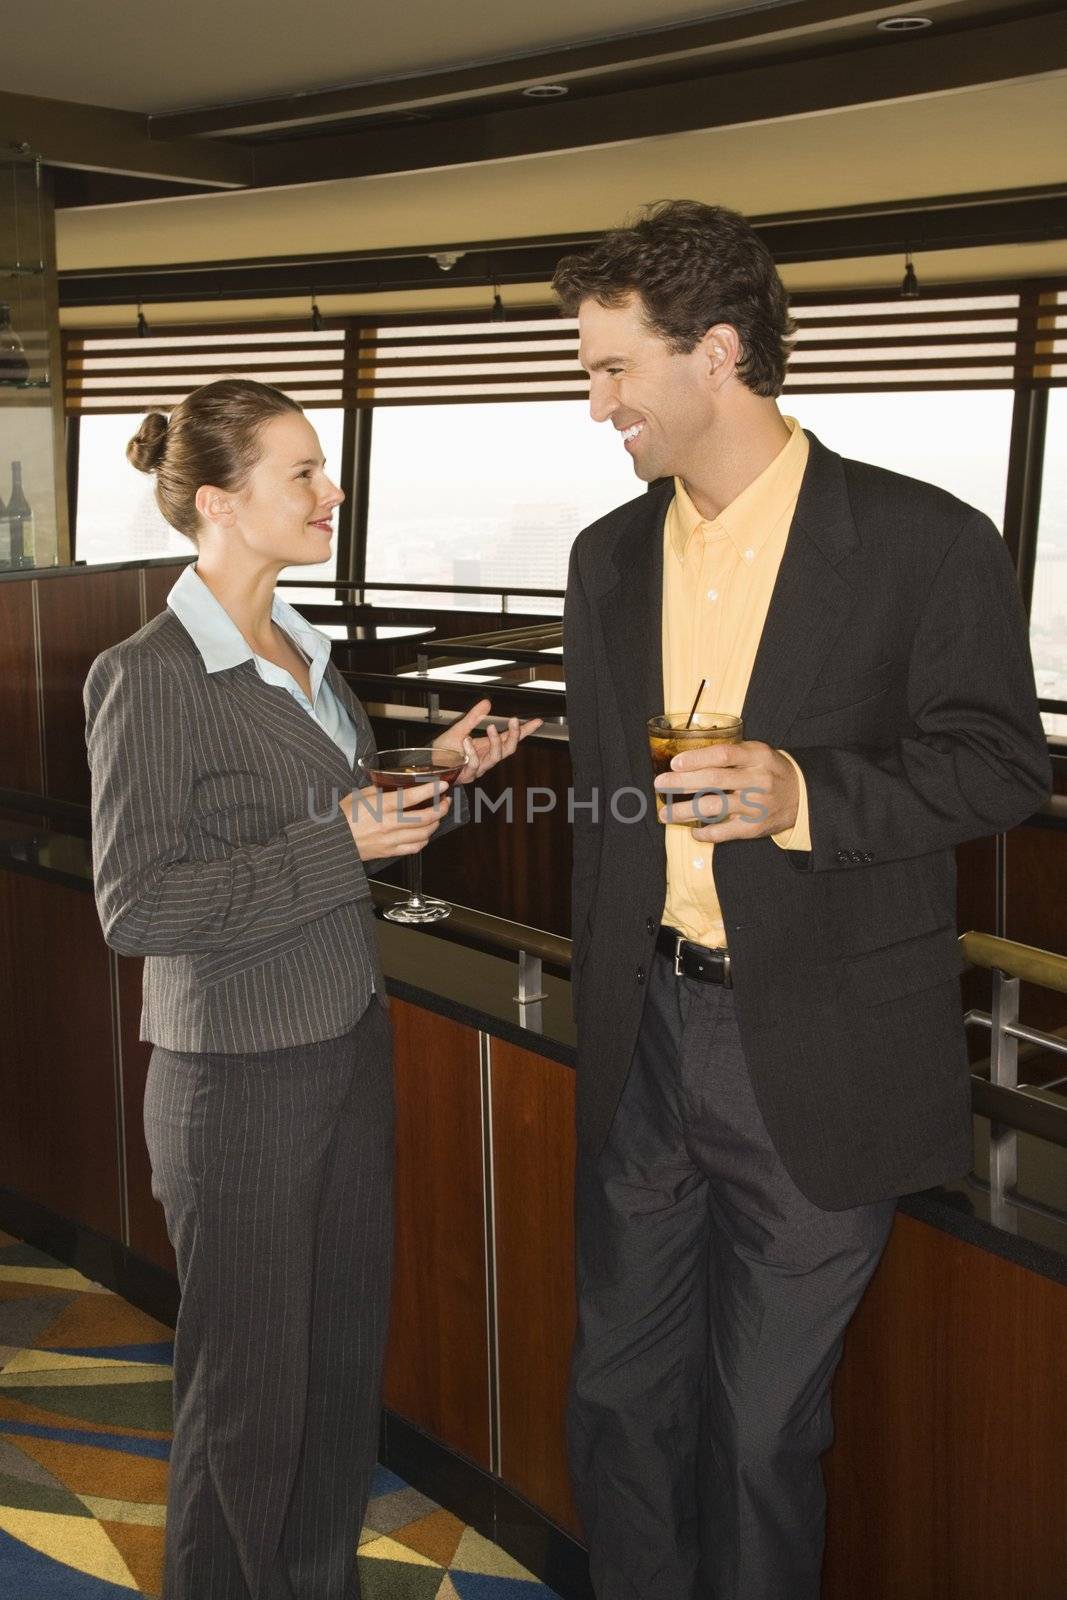 Caucasian business man and woman standing in bar with alcoholic beverages.